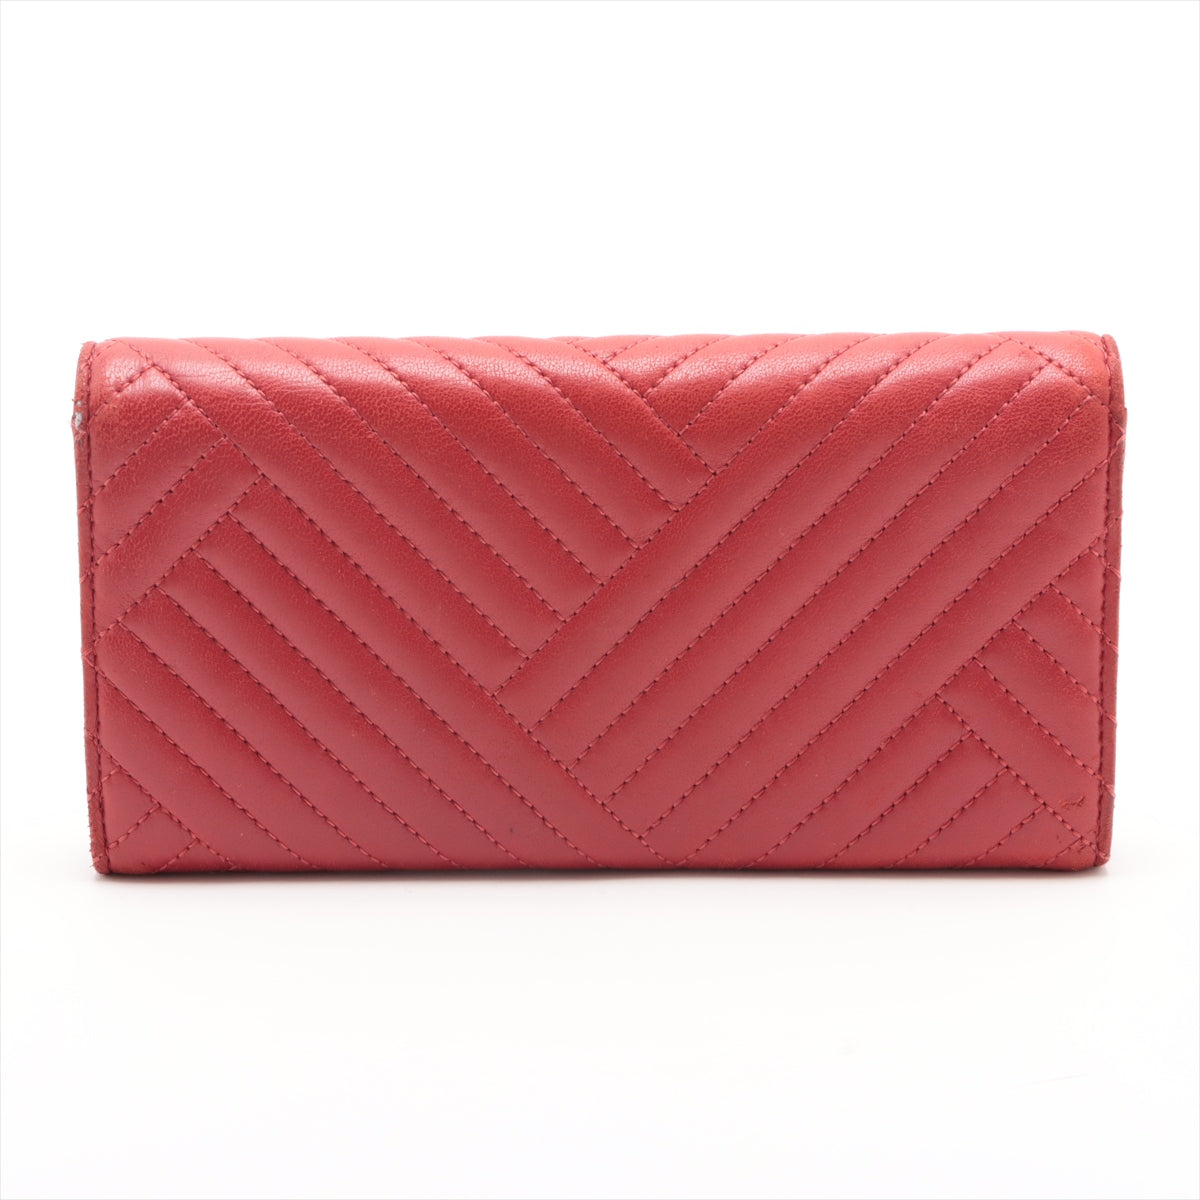 Chanel Coco Mark Lambskin Wallet Red Silver Metal fittings 21XXXXXX